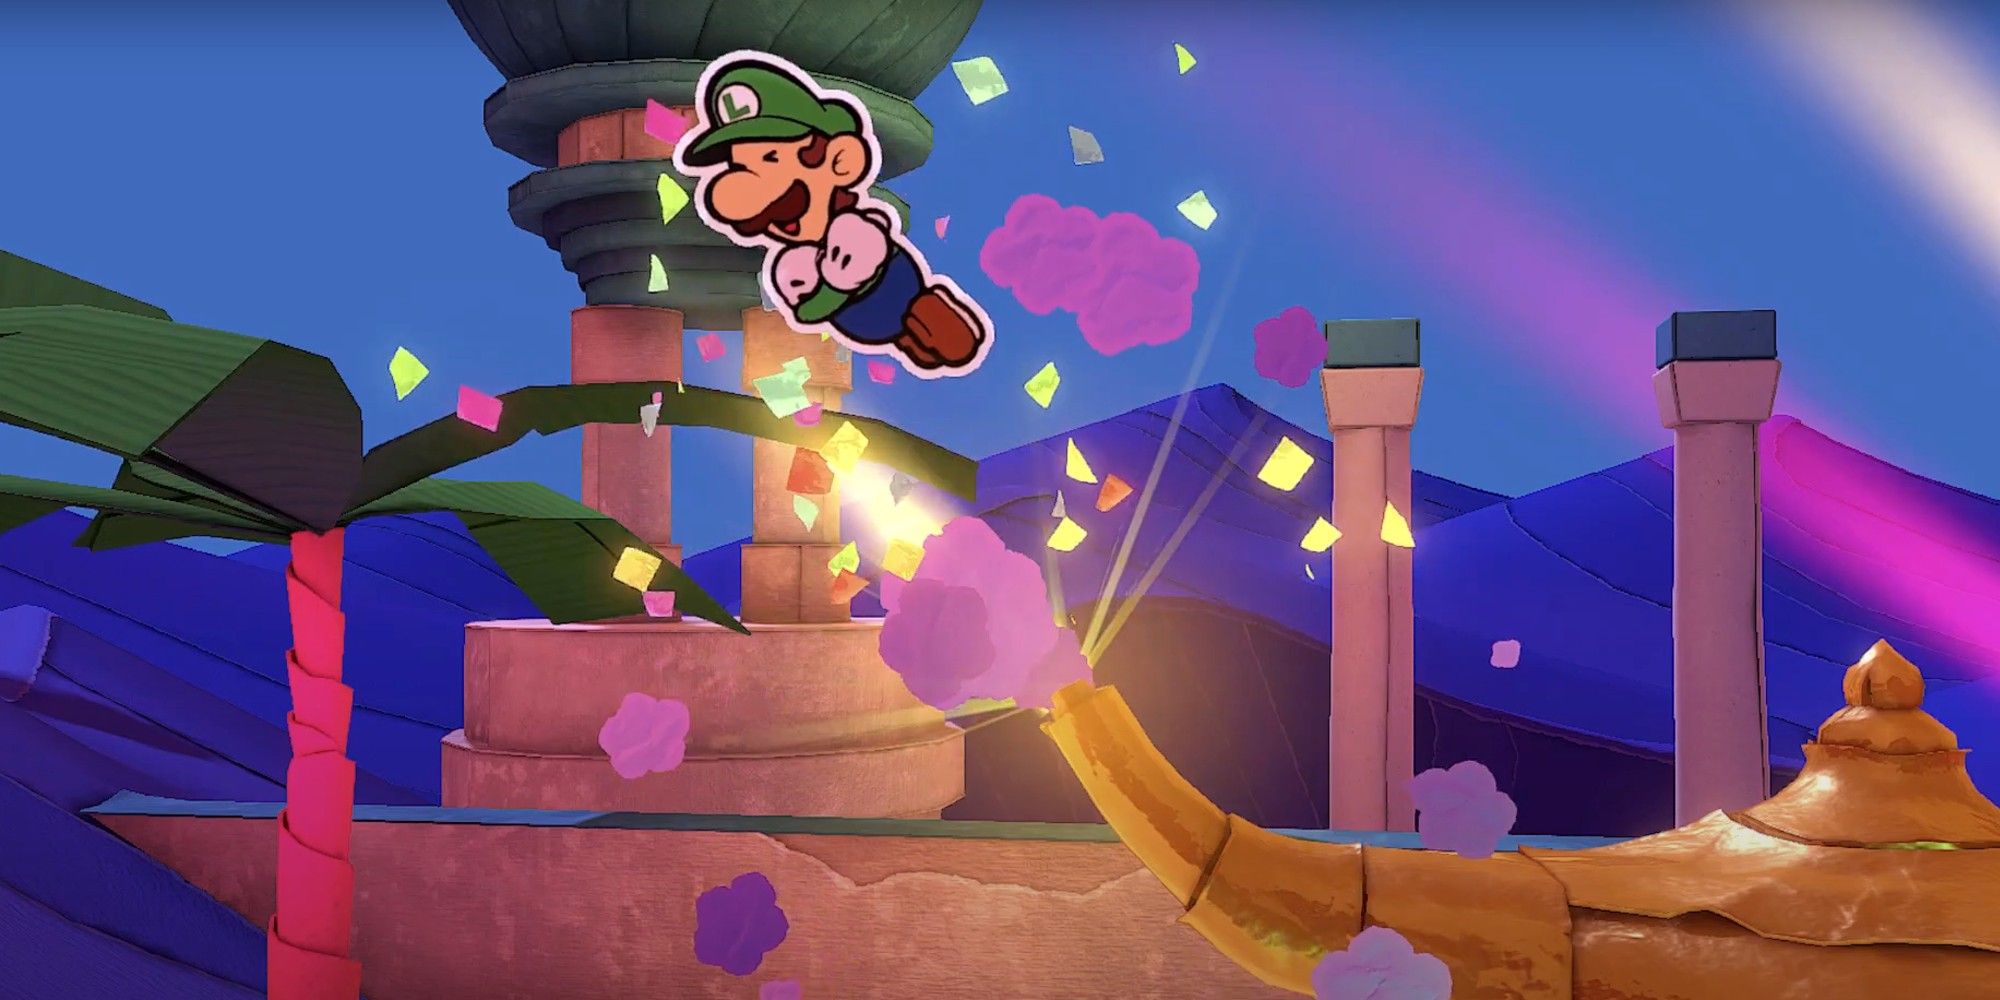 Beating the Snifit's mini-game in Paper Mario: The Origami King will free Luigi from the Magic Lamp